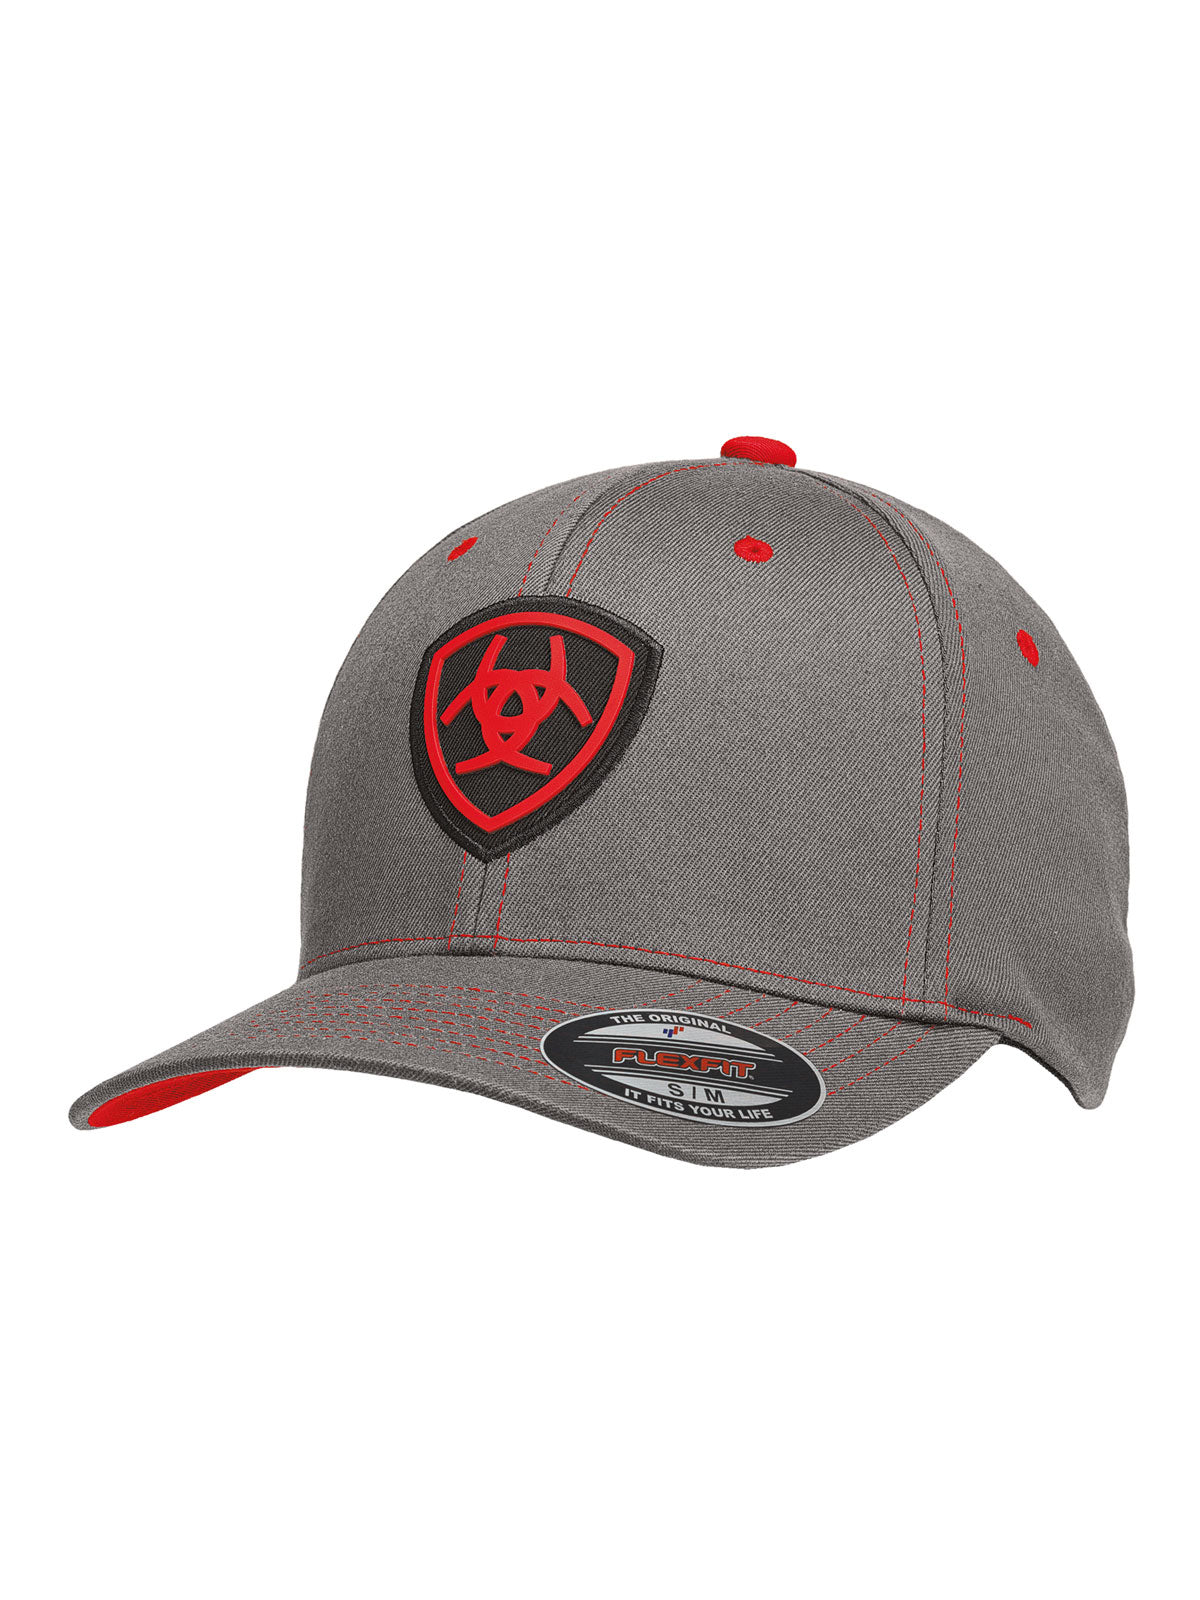 Ariat 1512406 FlexFit Cap in Gray with Red Logo Front View